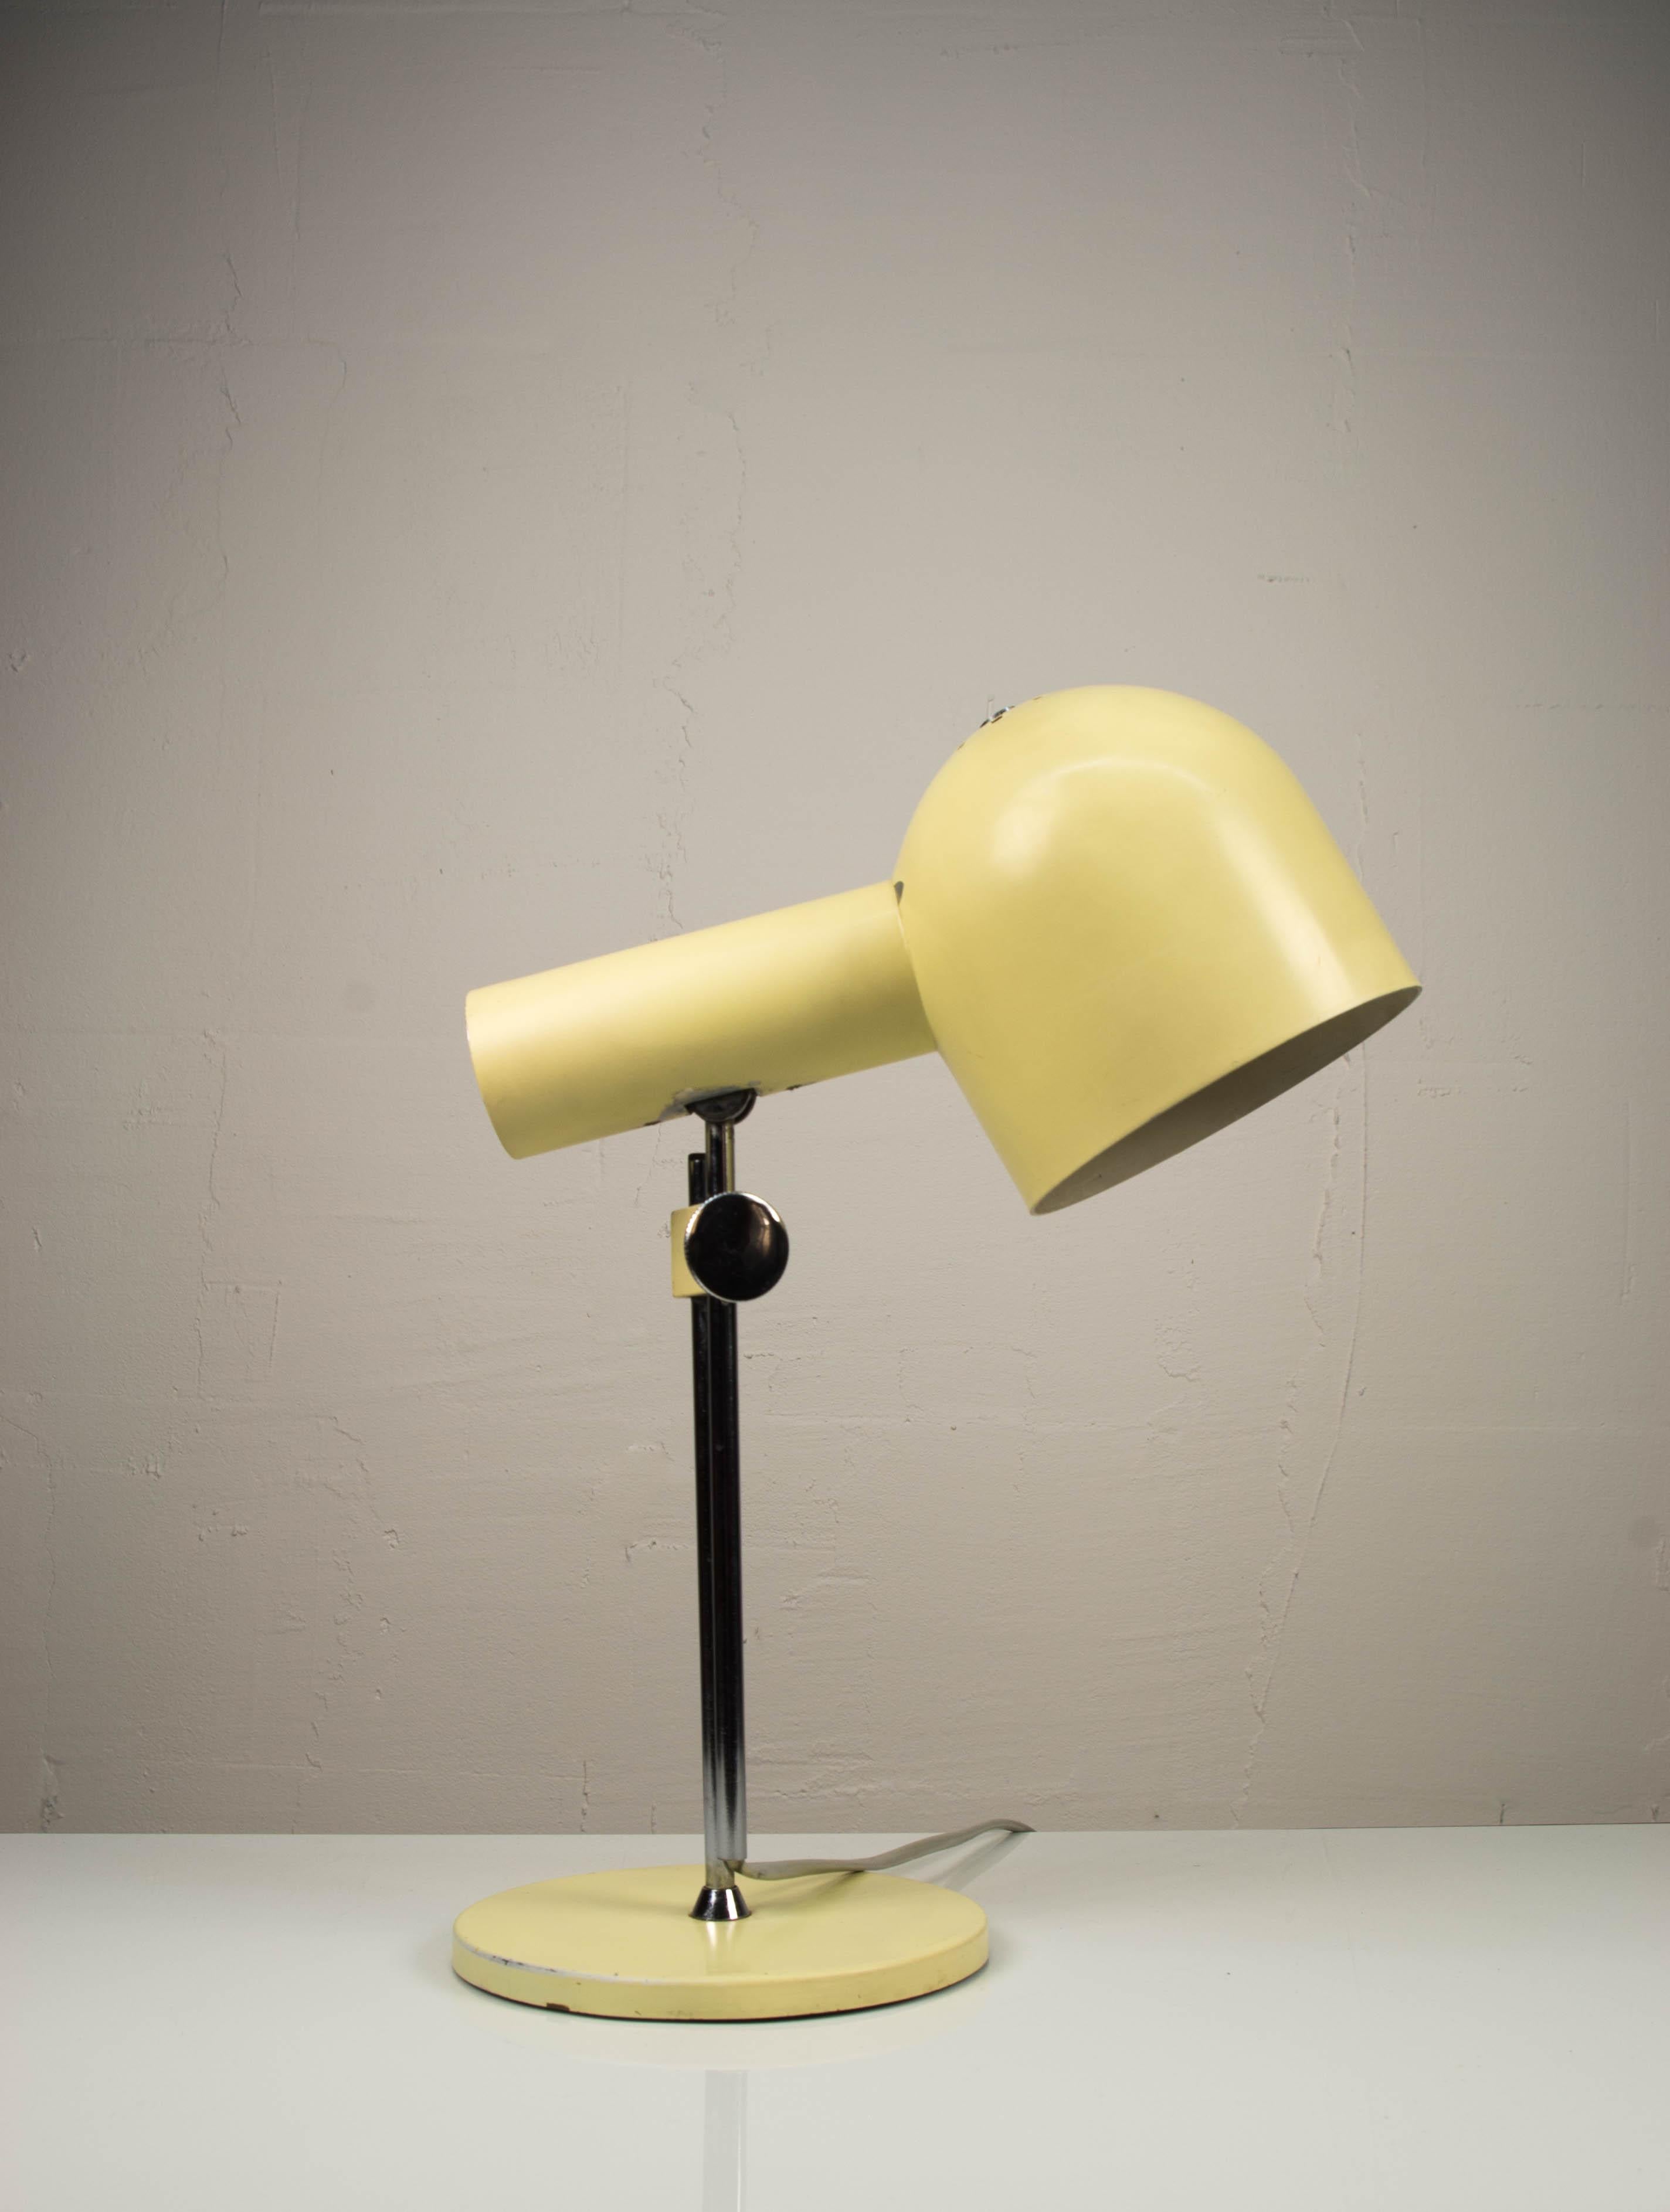 Rare type of table lamp made by Napako in Czechoslovakia in 1970s
Minor age patina
Adjustable height
1x40W, E27 bulb 
US plug adapter included
